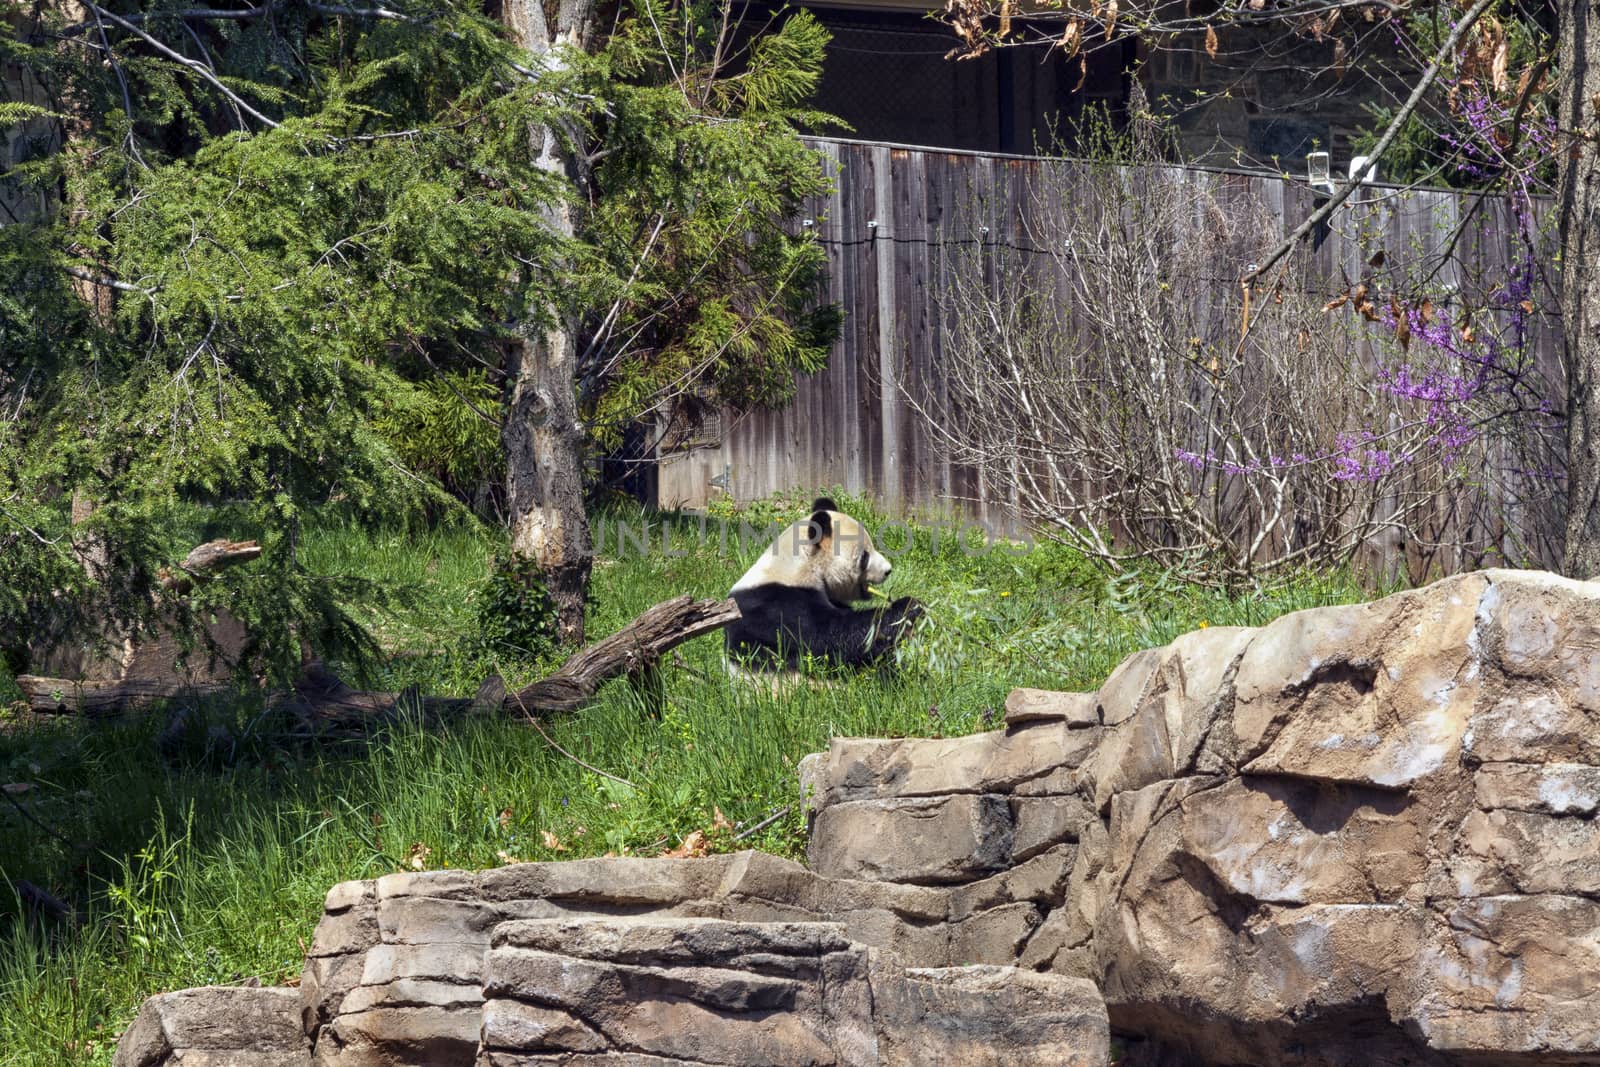 A lone Panda sitting eating a piece of bamboo